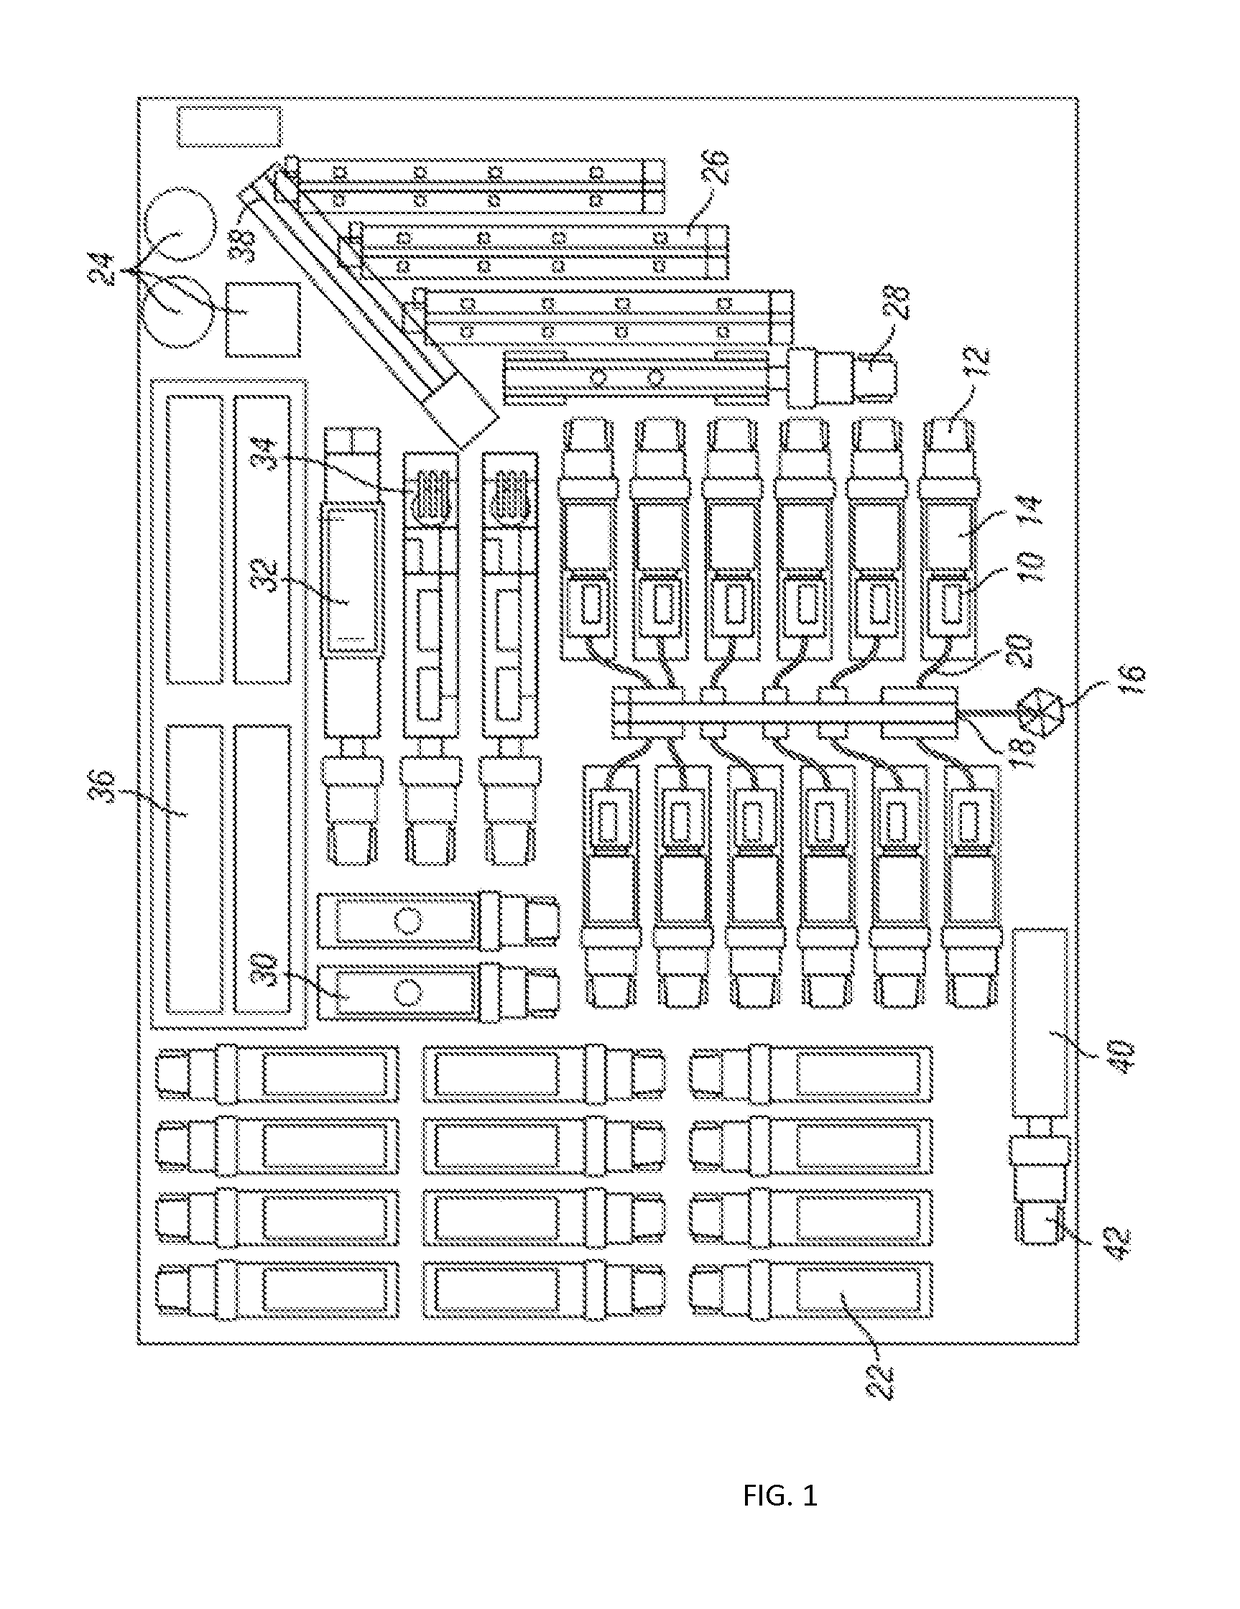 System for centralized monitoring and control of electric powered hydraulic fracturing fleet